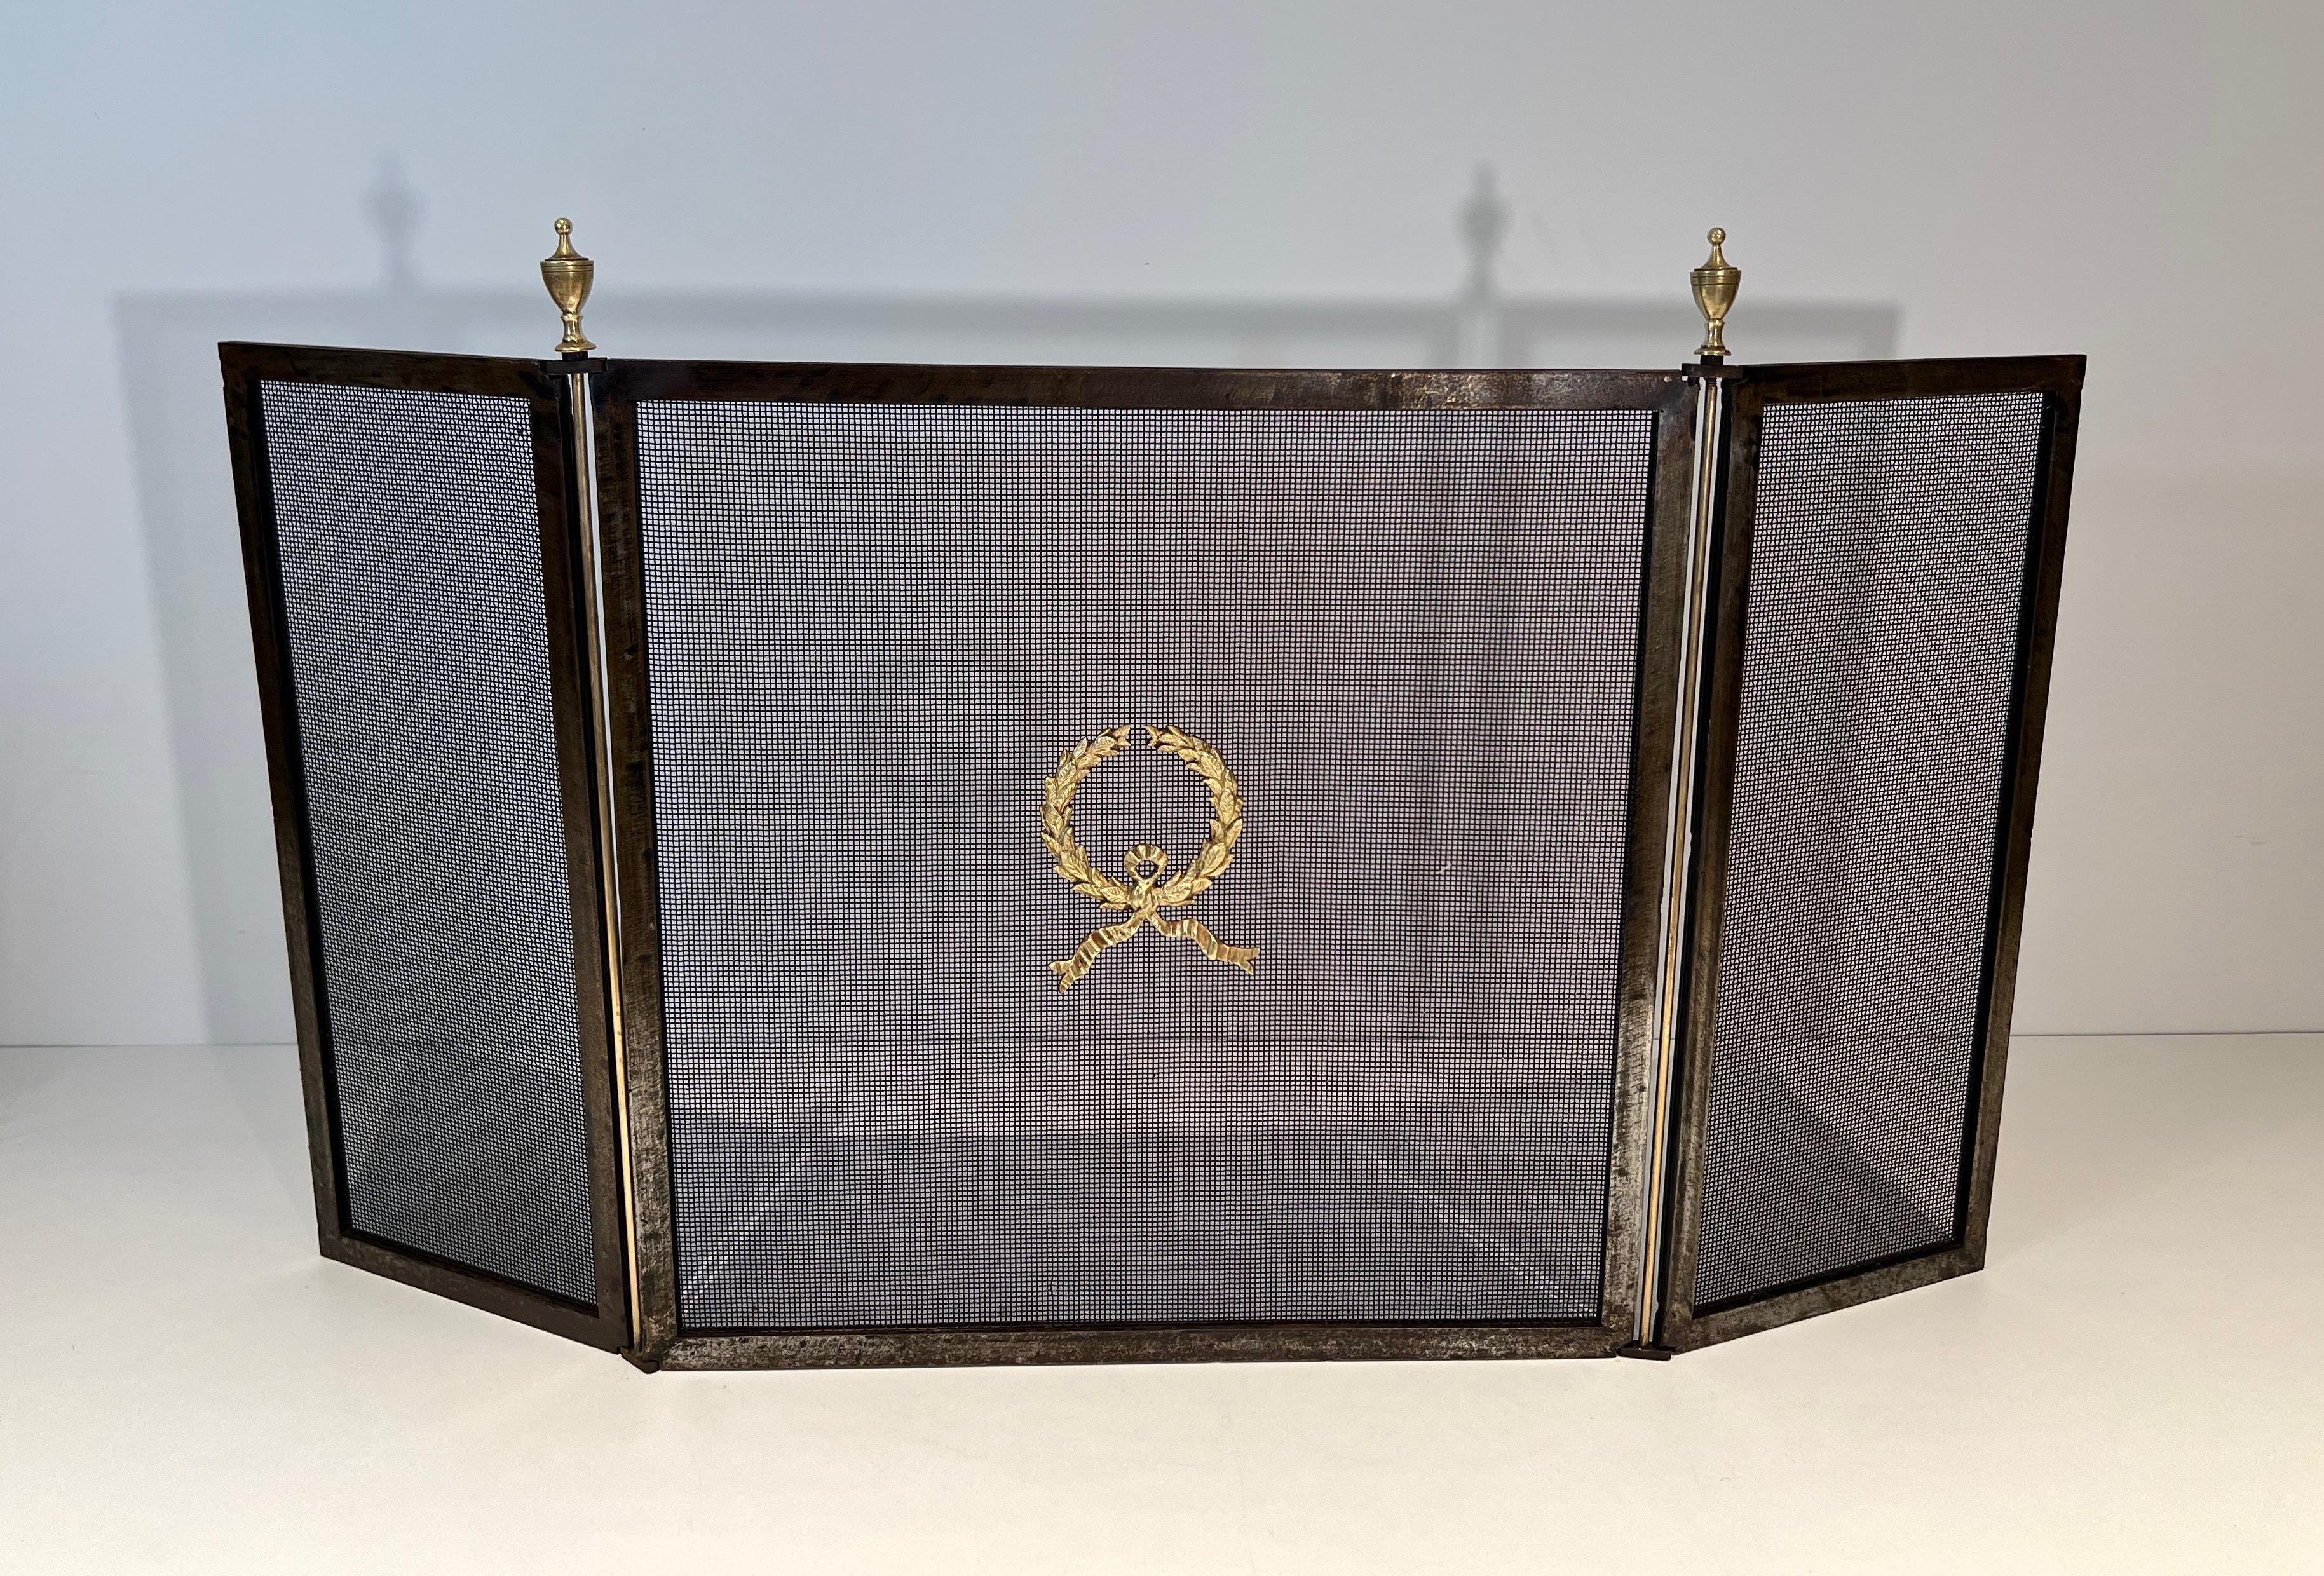 This neoclassical style fireplace screen with 3 panels is made of steel and brass with a grilling on each panel. The central part is decorated with a laurel wreath. This is a French work. Circa 1940